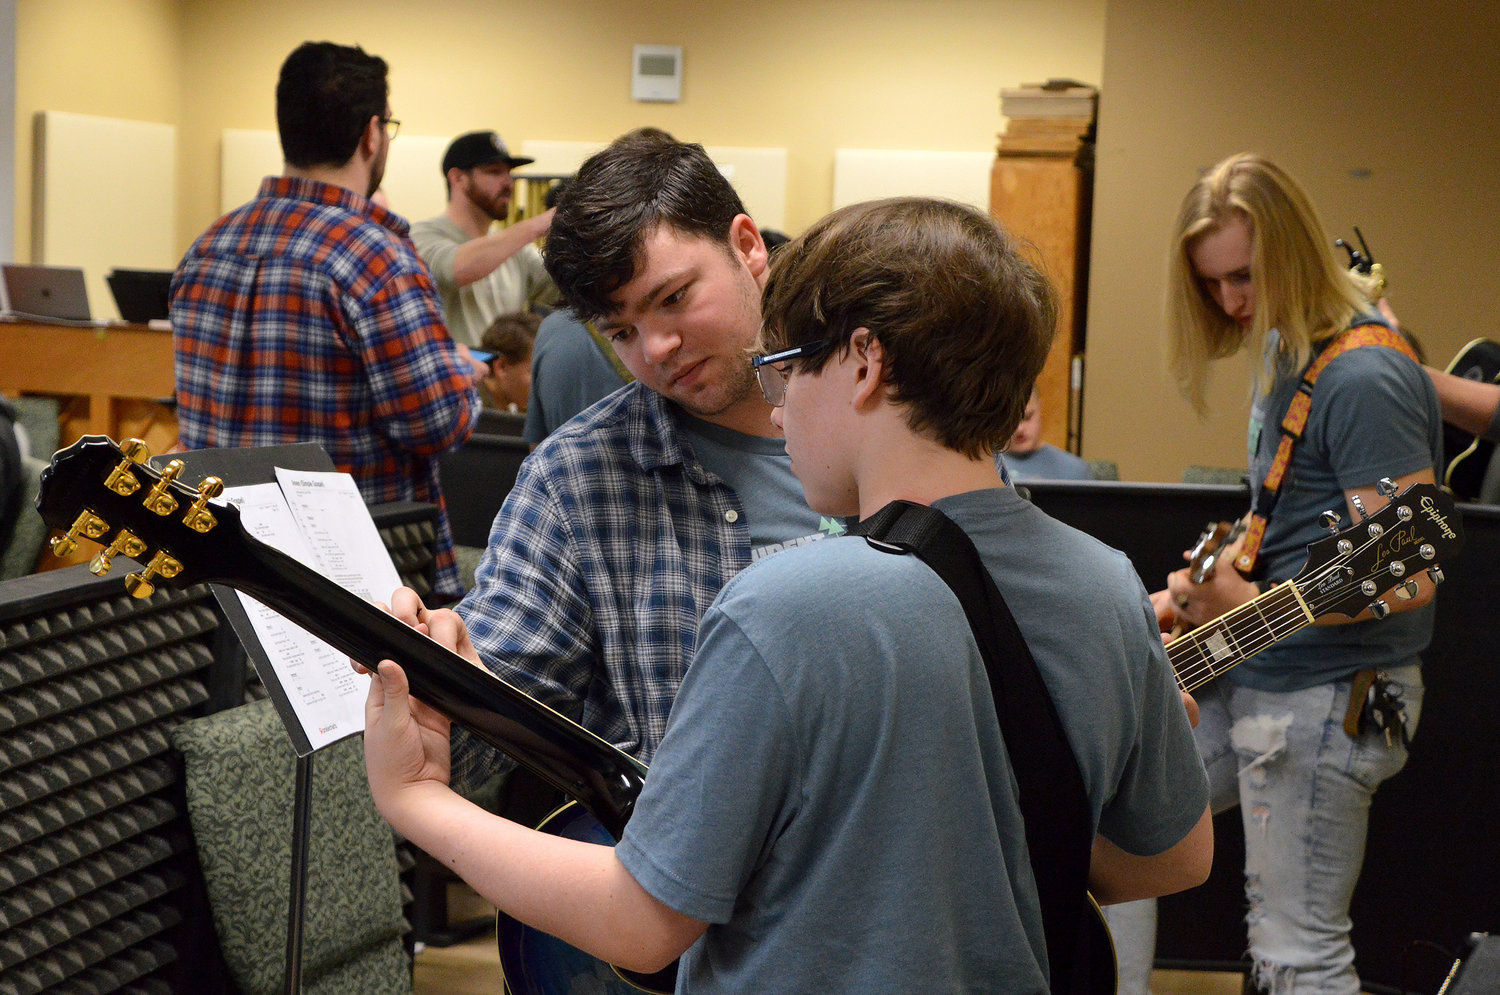 Caleb Hutchins, rear, helps Evan Purser with his guitar work during a praise team rehearsal at REEL Fest 2023 held at First Baptist Church of Jonesboro, Ga., Saturday, Jan. 21, 2023. (Index/Henry Durand)